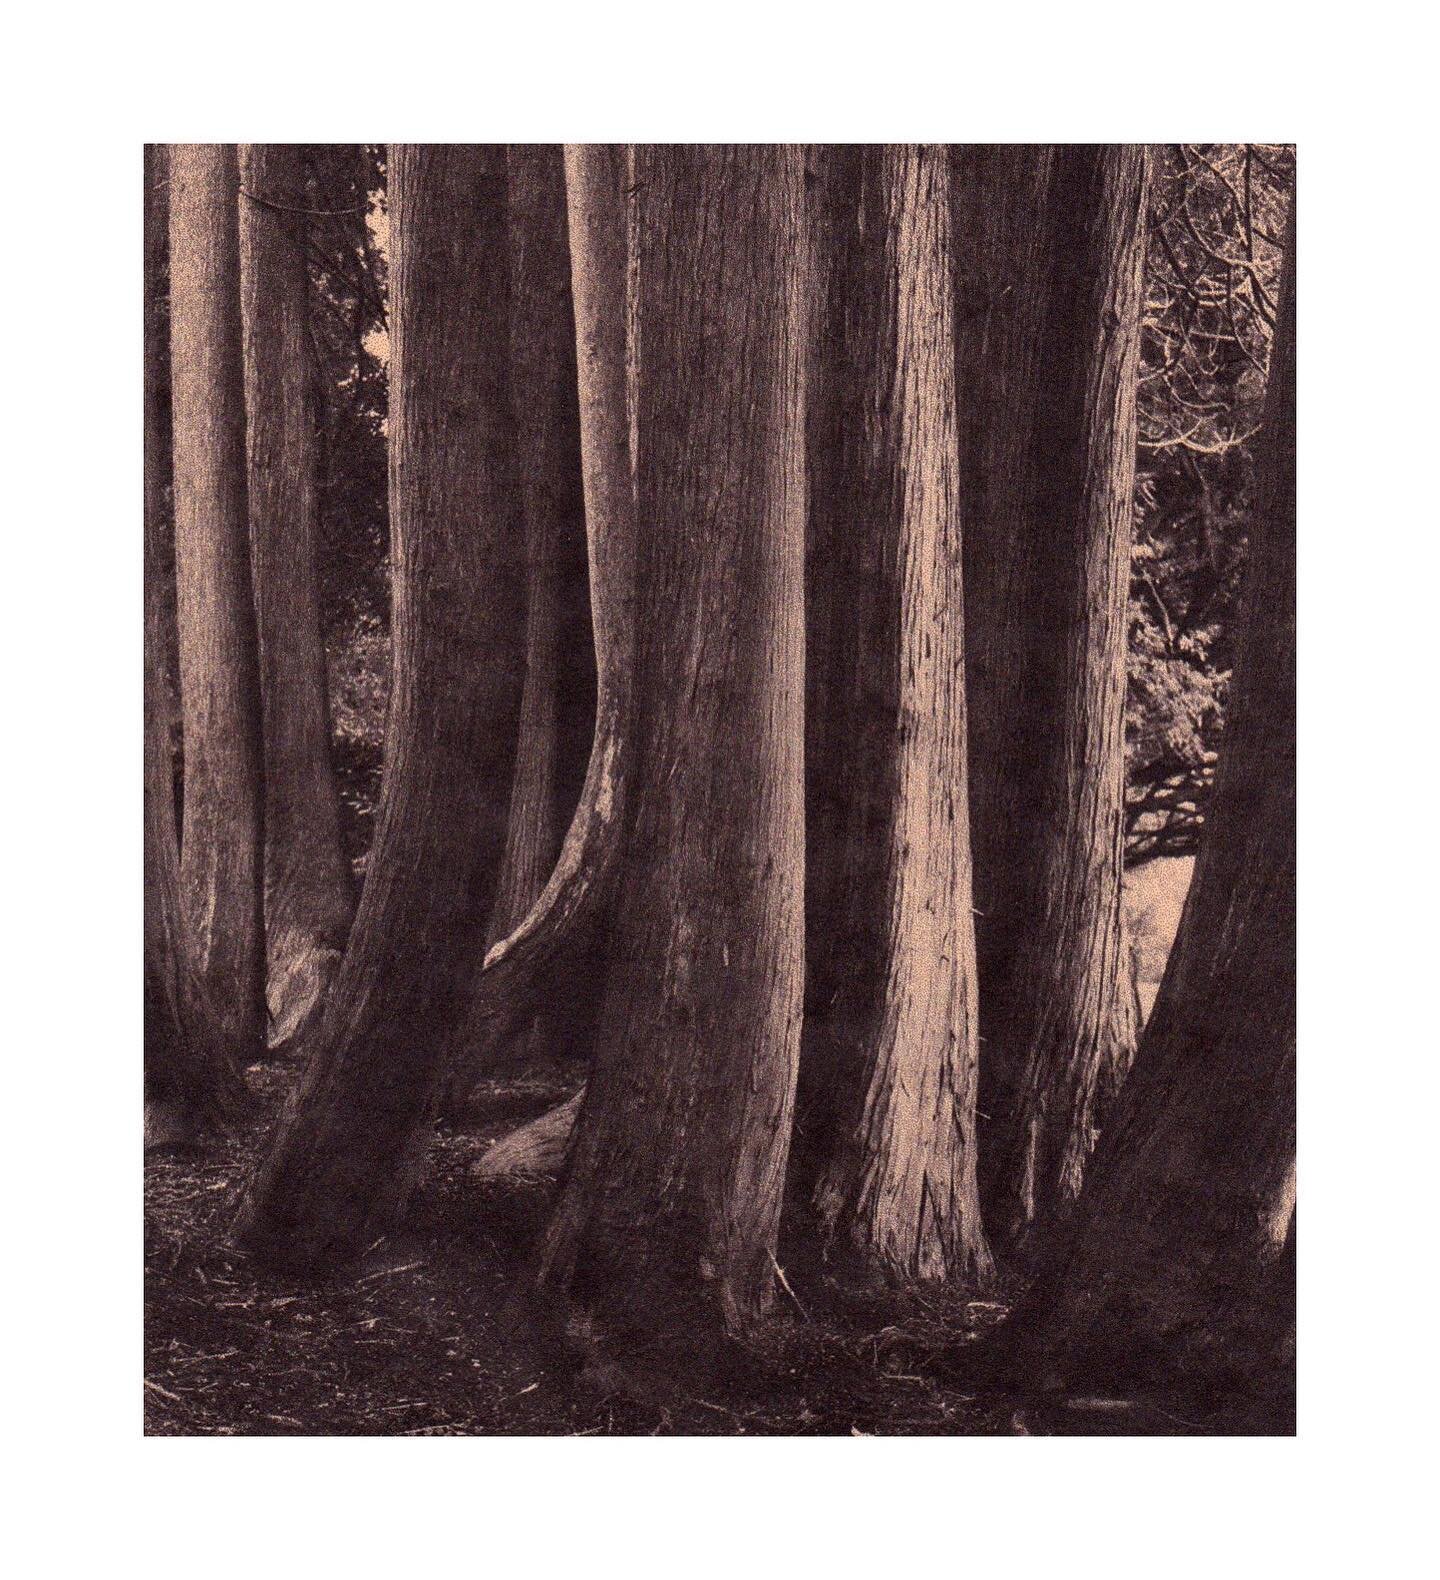 &ldquo;Lamenting the Earth&rdquo; 
Toned rice paper prints
.
.
.
.
.
.
#alternativeprocesses #antiquated #antiquatedphotography #landscape #landscapephotography #landscapeart #melancholy #earth #poetry #forest #bark #shadows #trees #prints #landscape